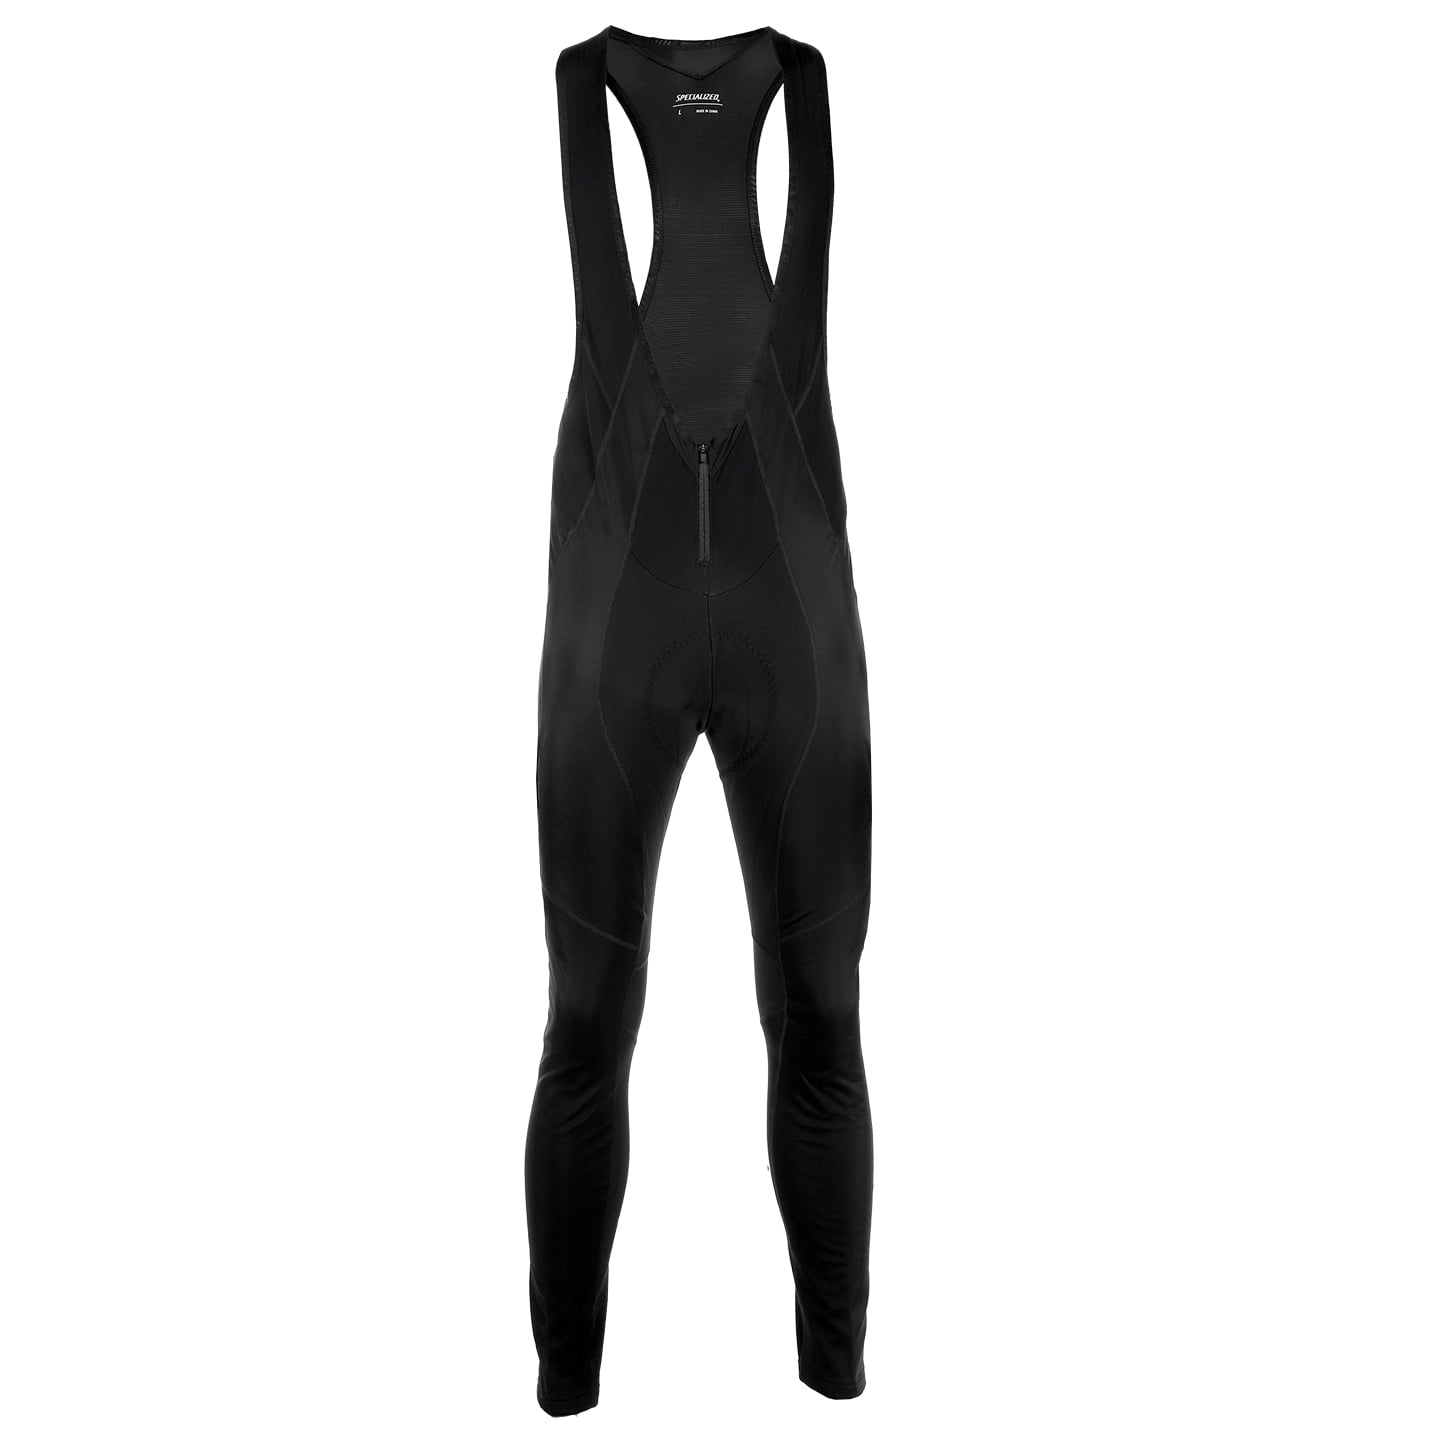 SPECIALIZED lange Tragerhose SL Expert Bib Tights Bib Tights, for men, size L, Cycle tights, Cycling clothing